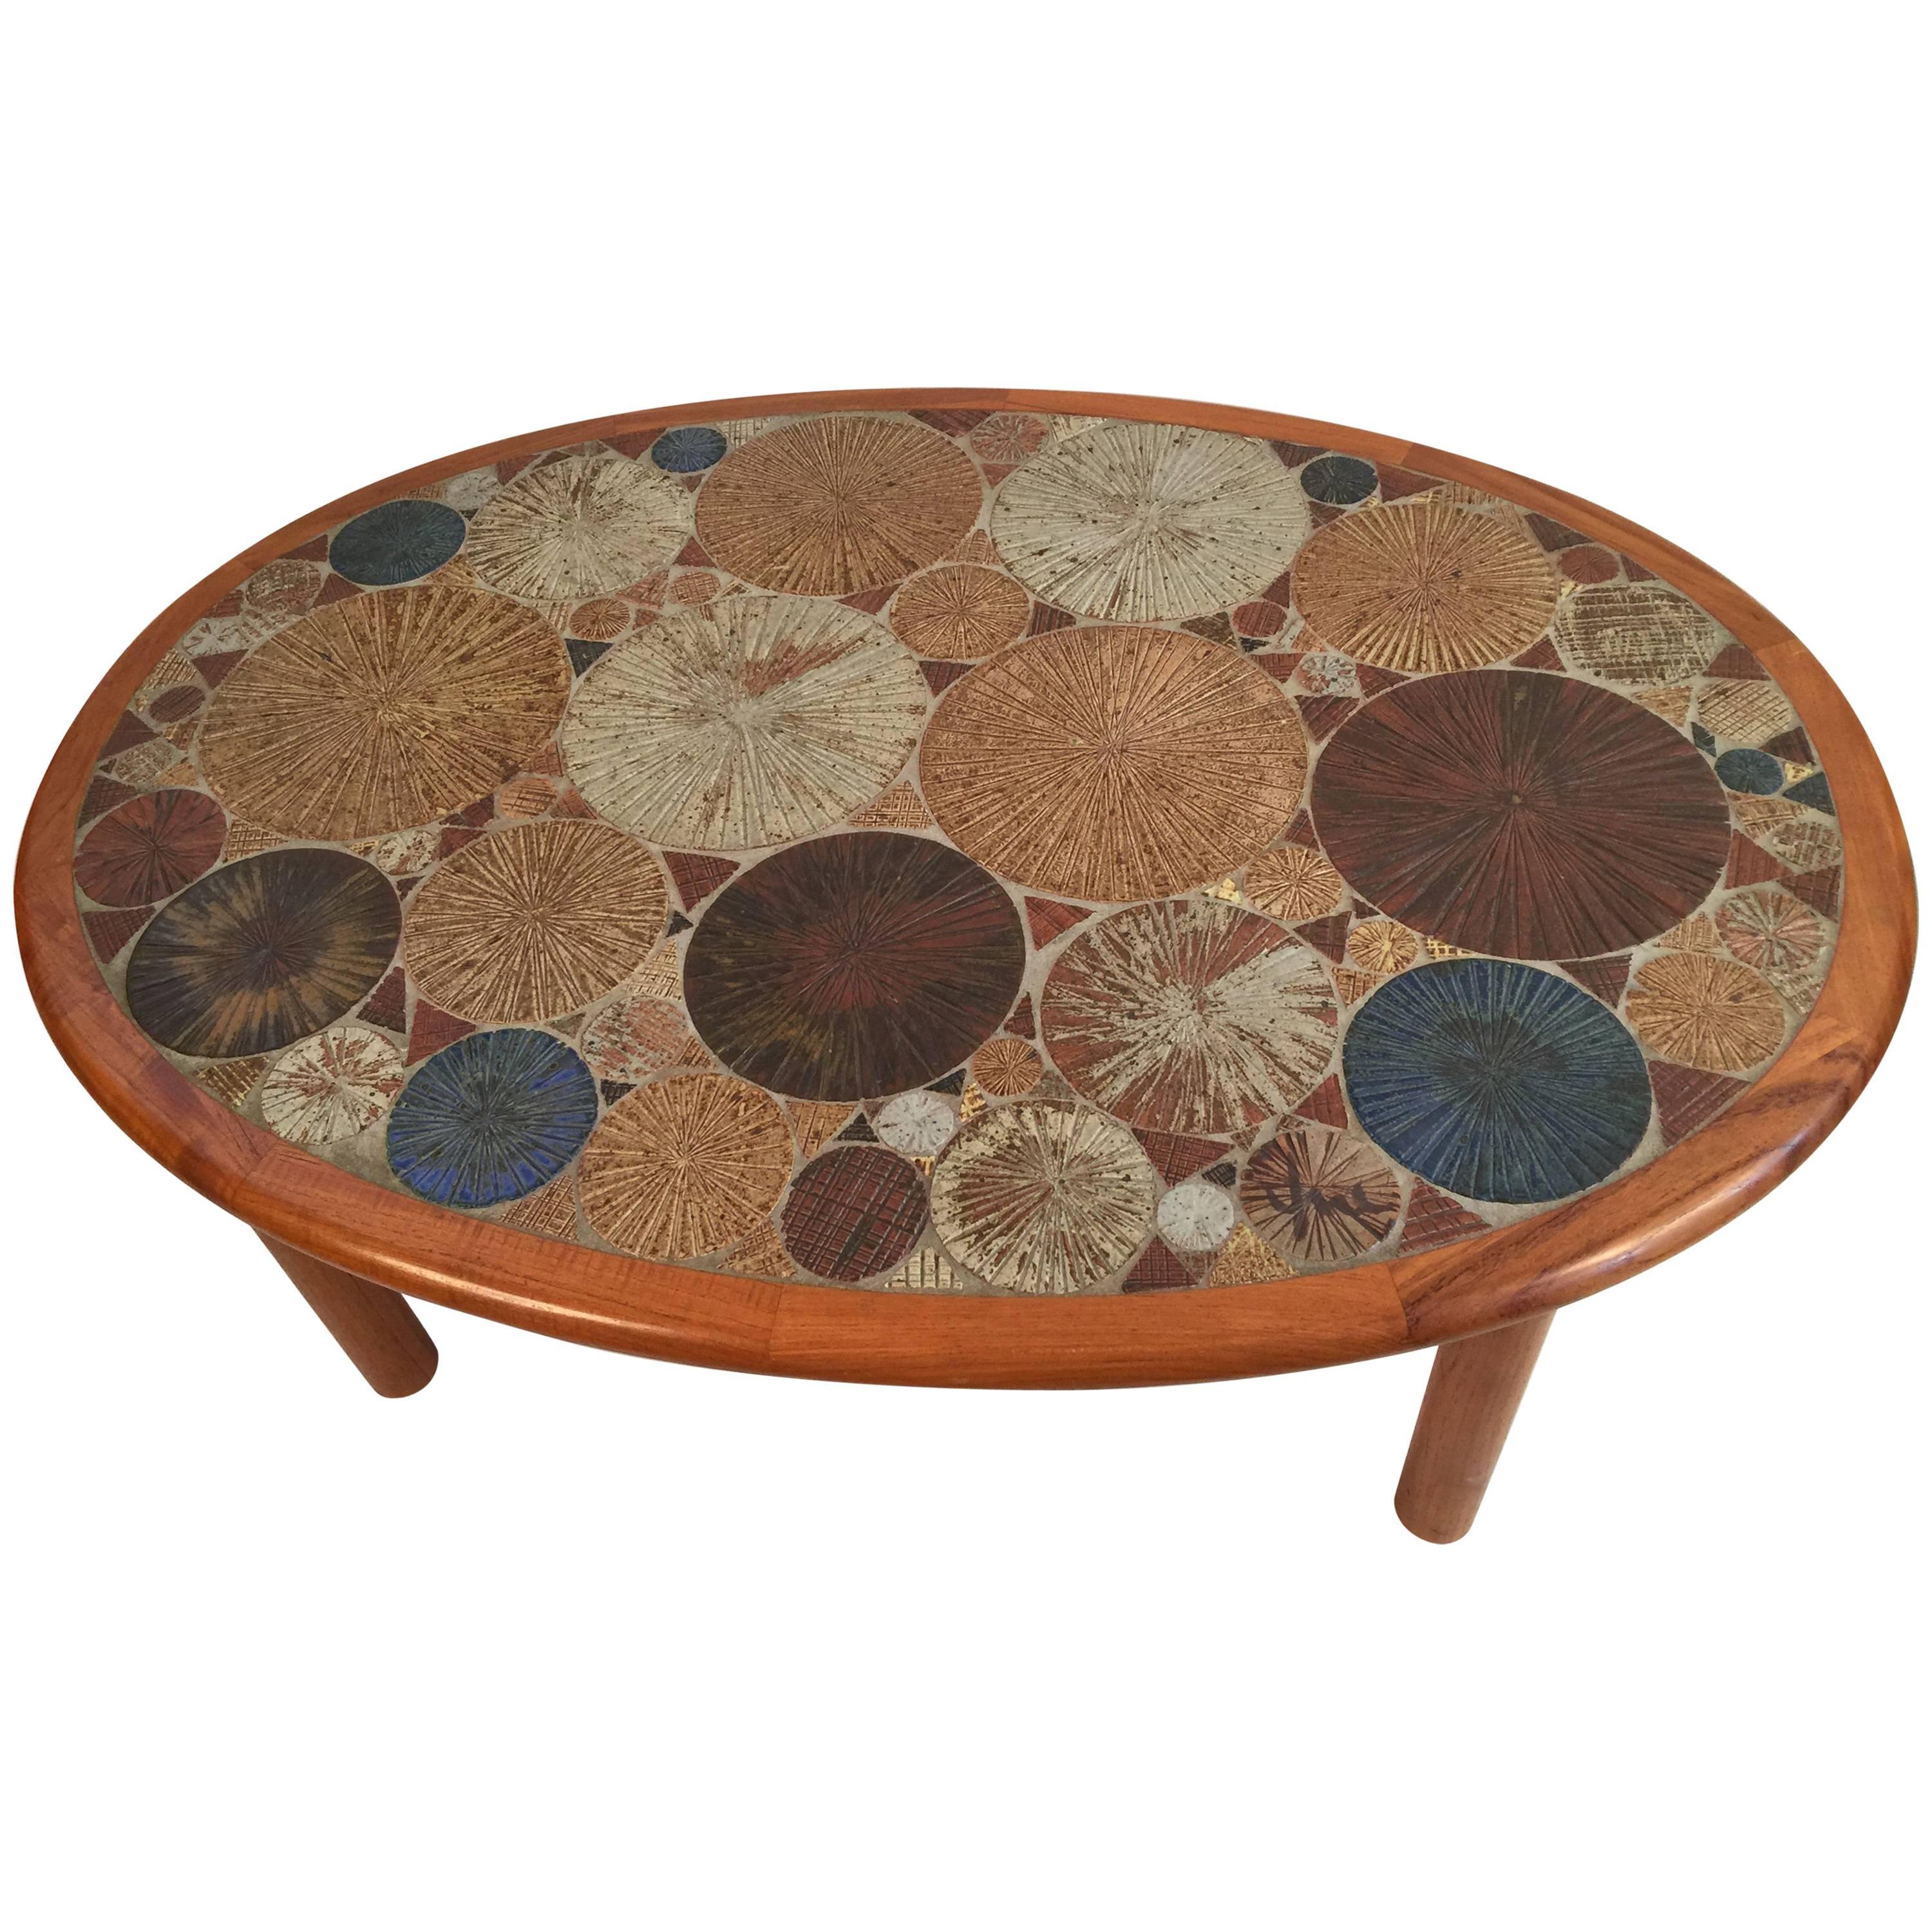 Tue Poulsen for Haslev Oval Coffee Table with Art Tile Inlay